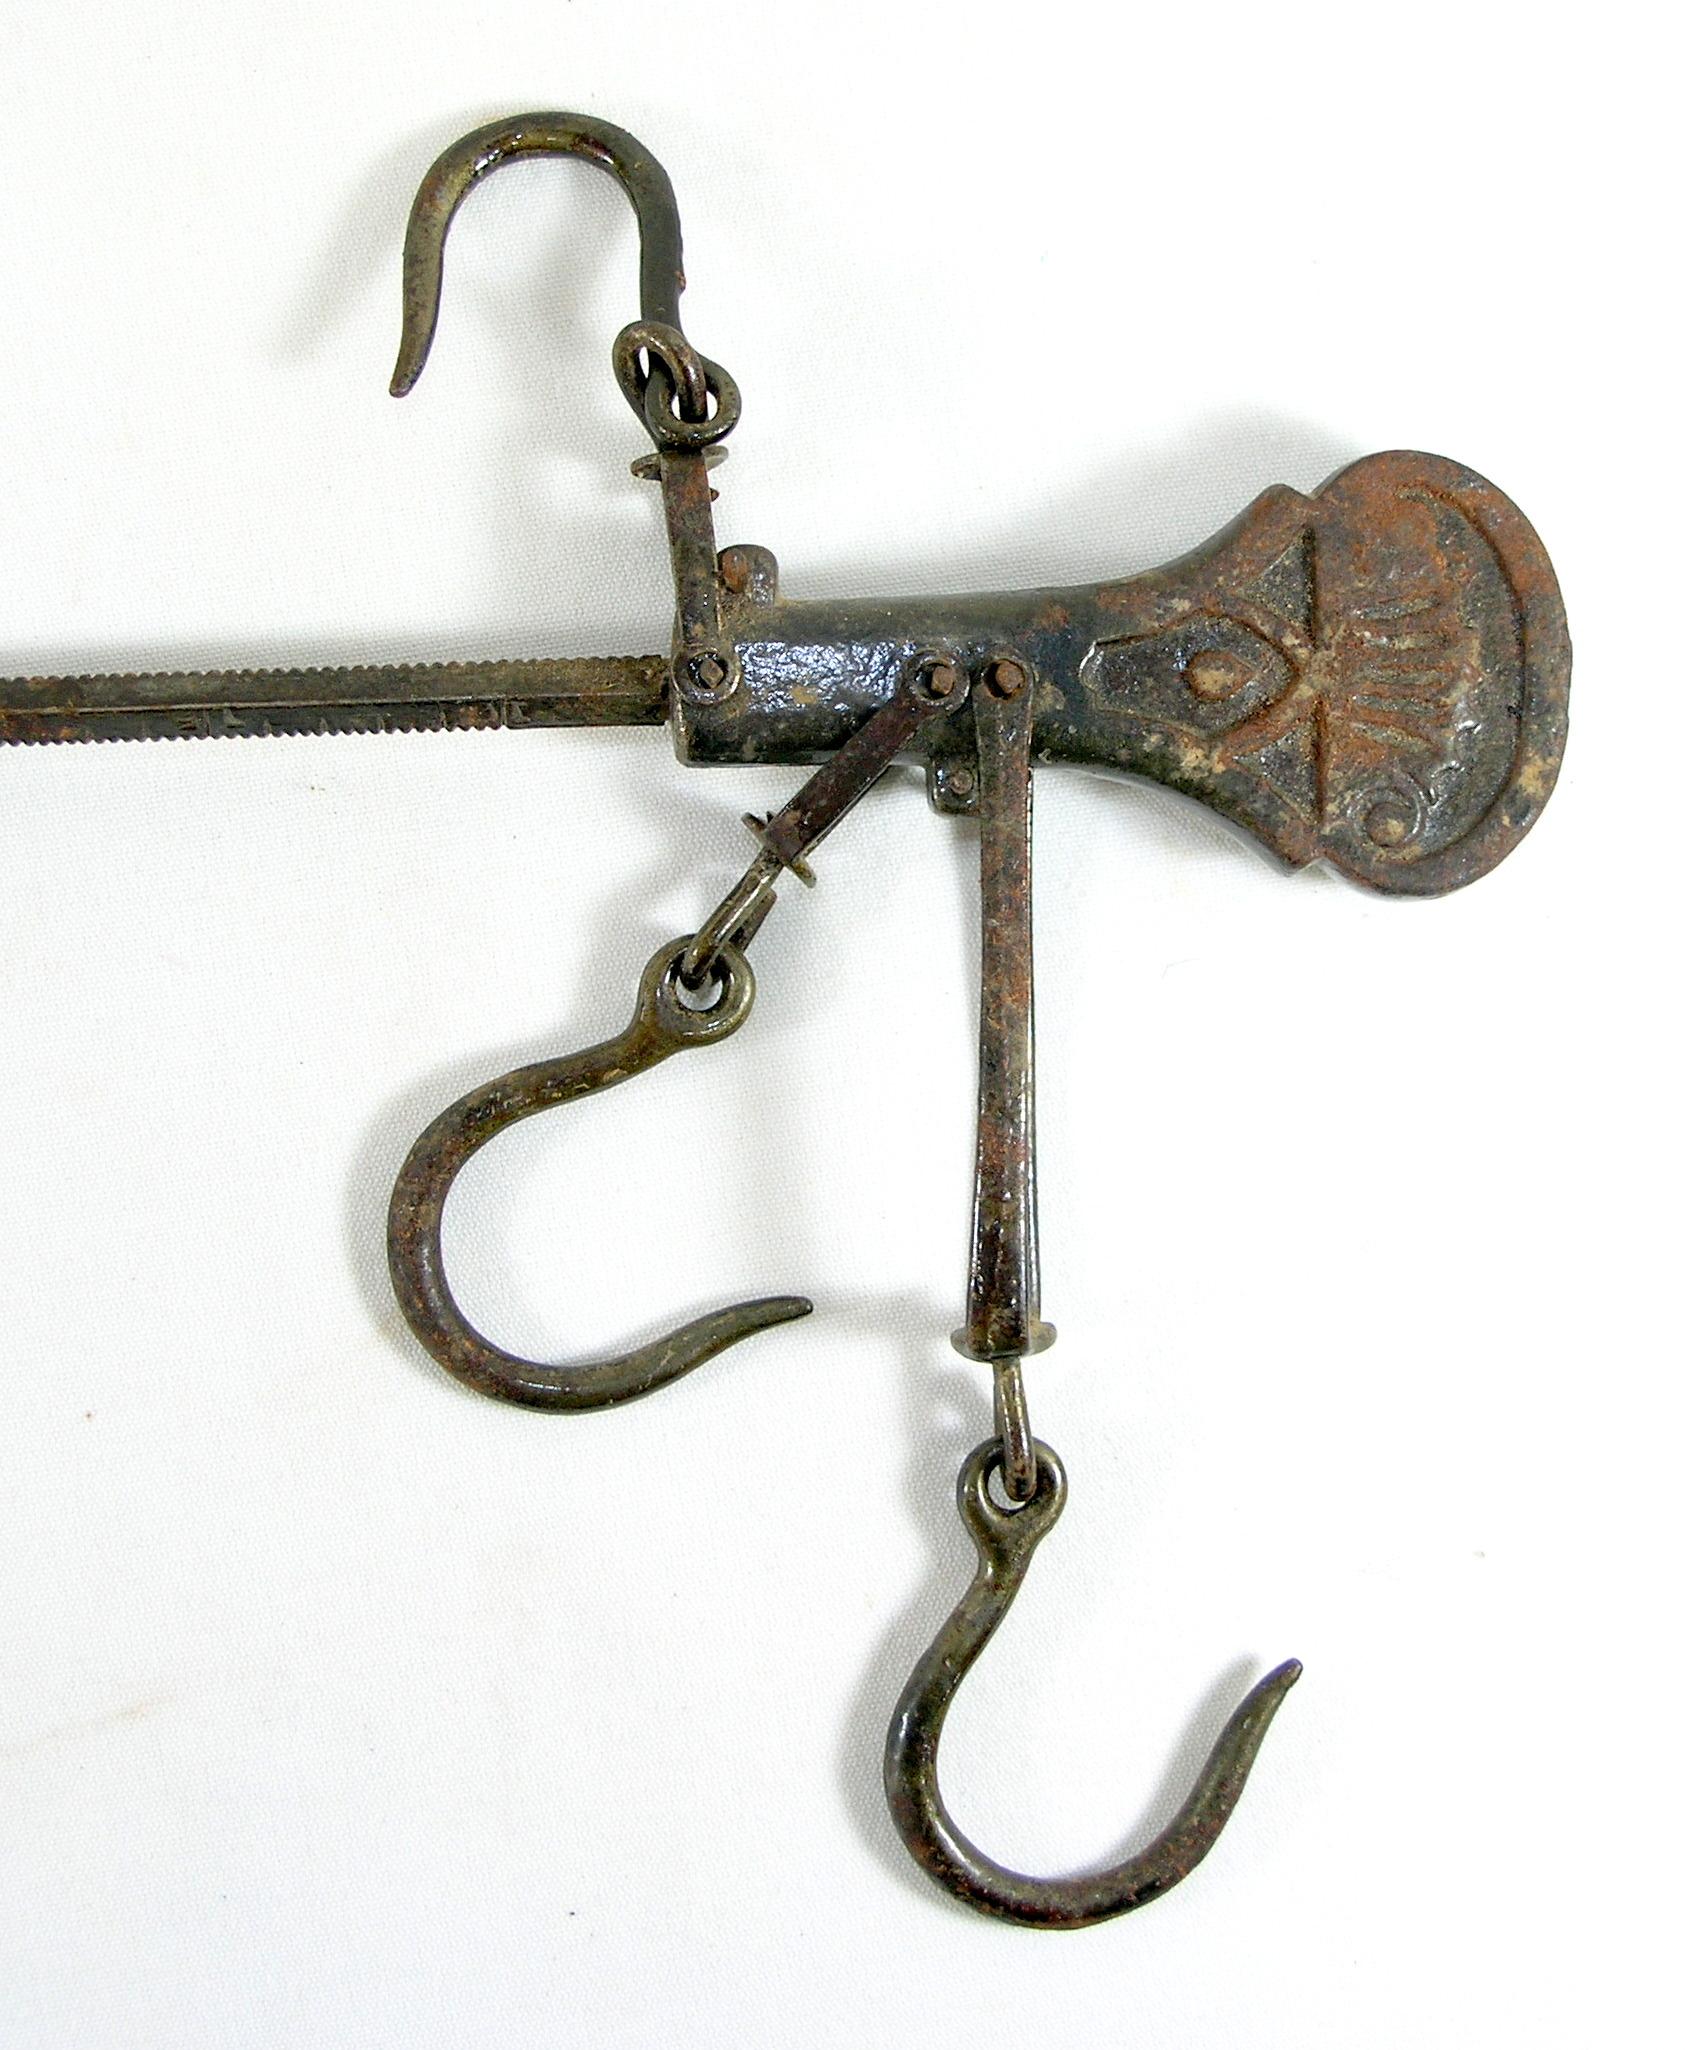 Vintage Antique Cast Iron Scale Balance Arm Counter Weight And Hooks Still